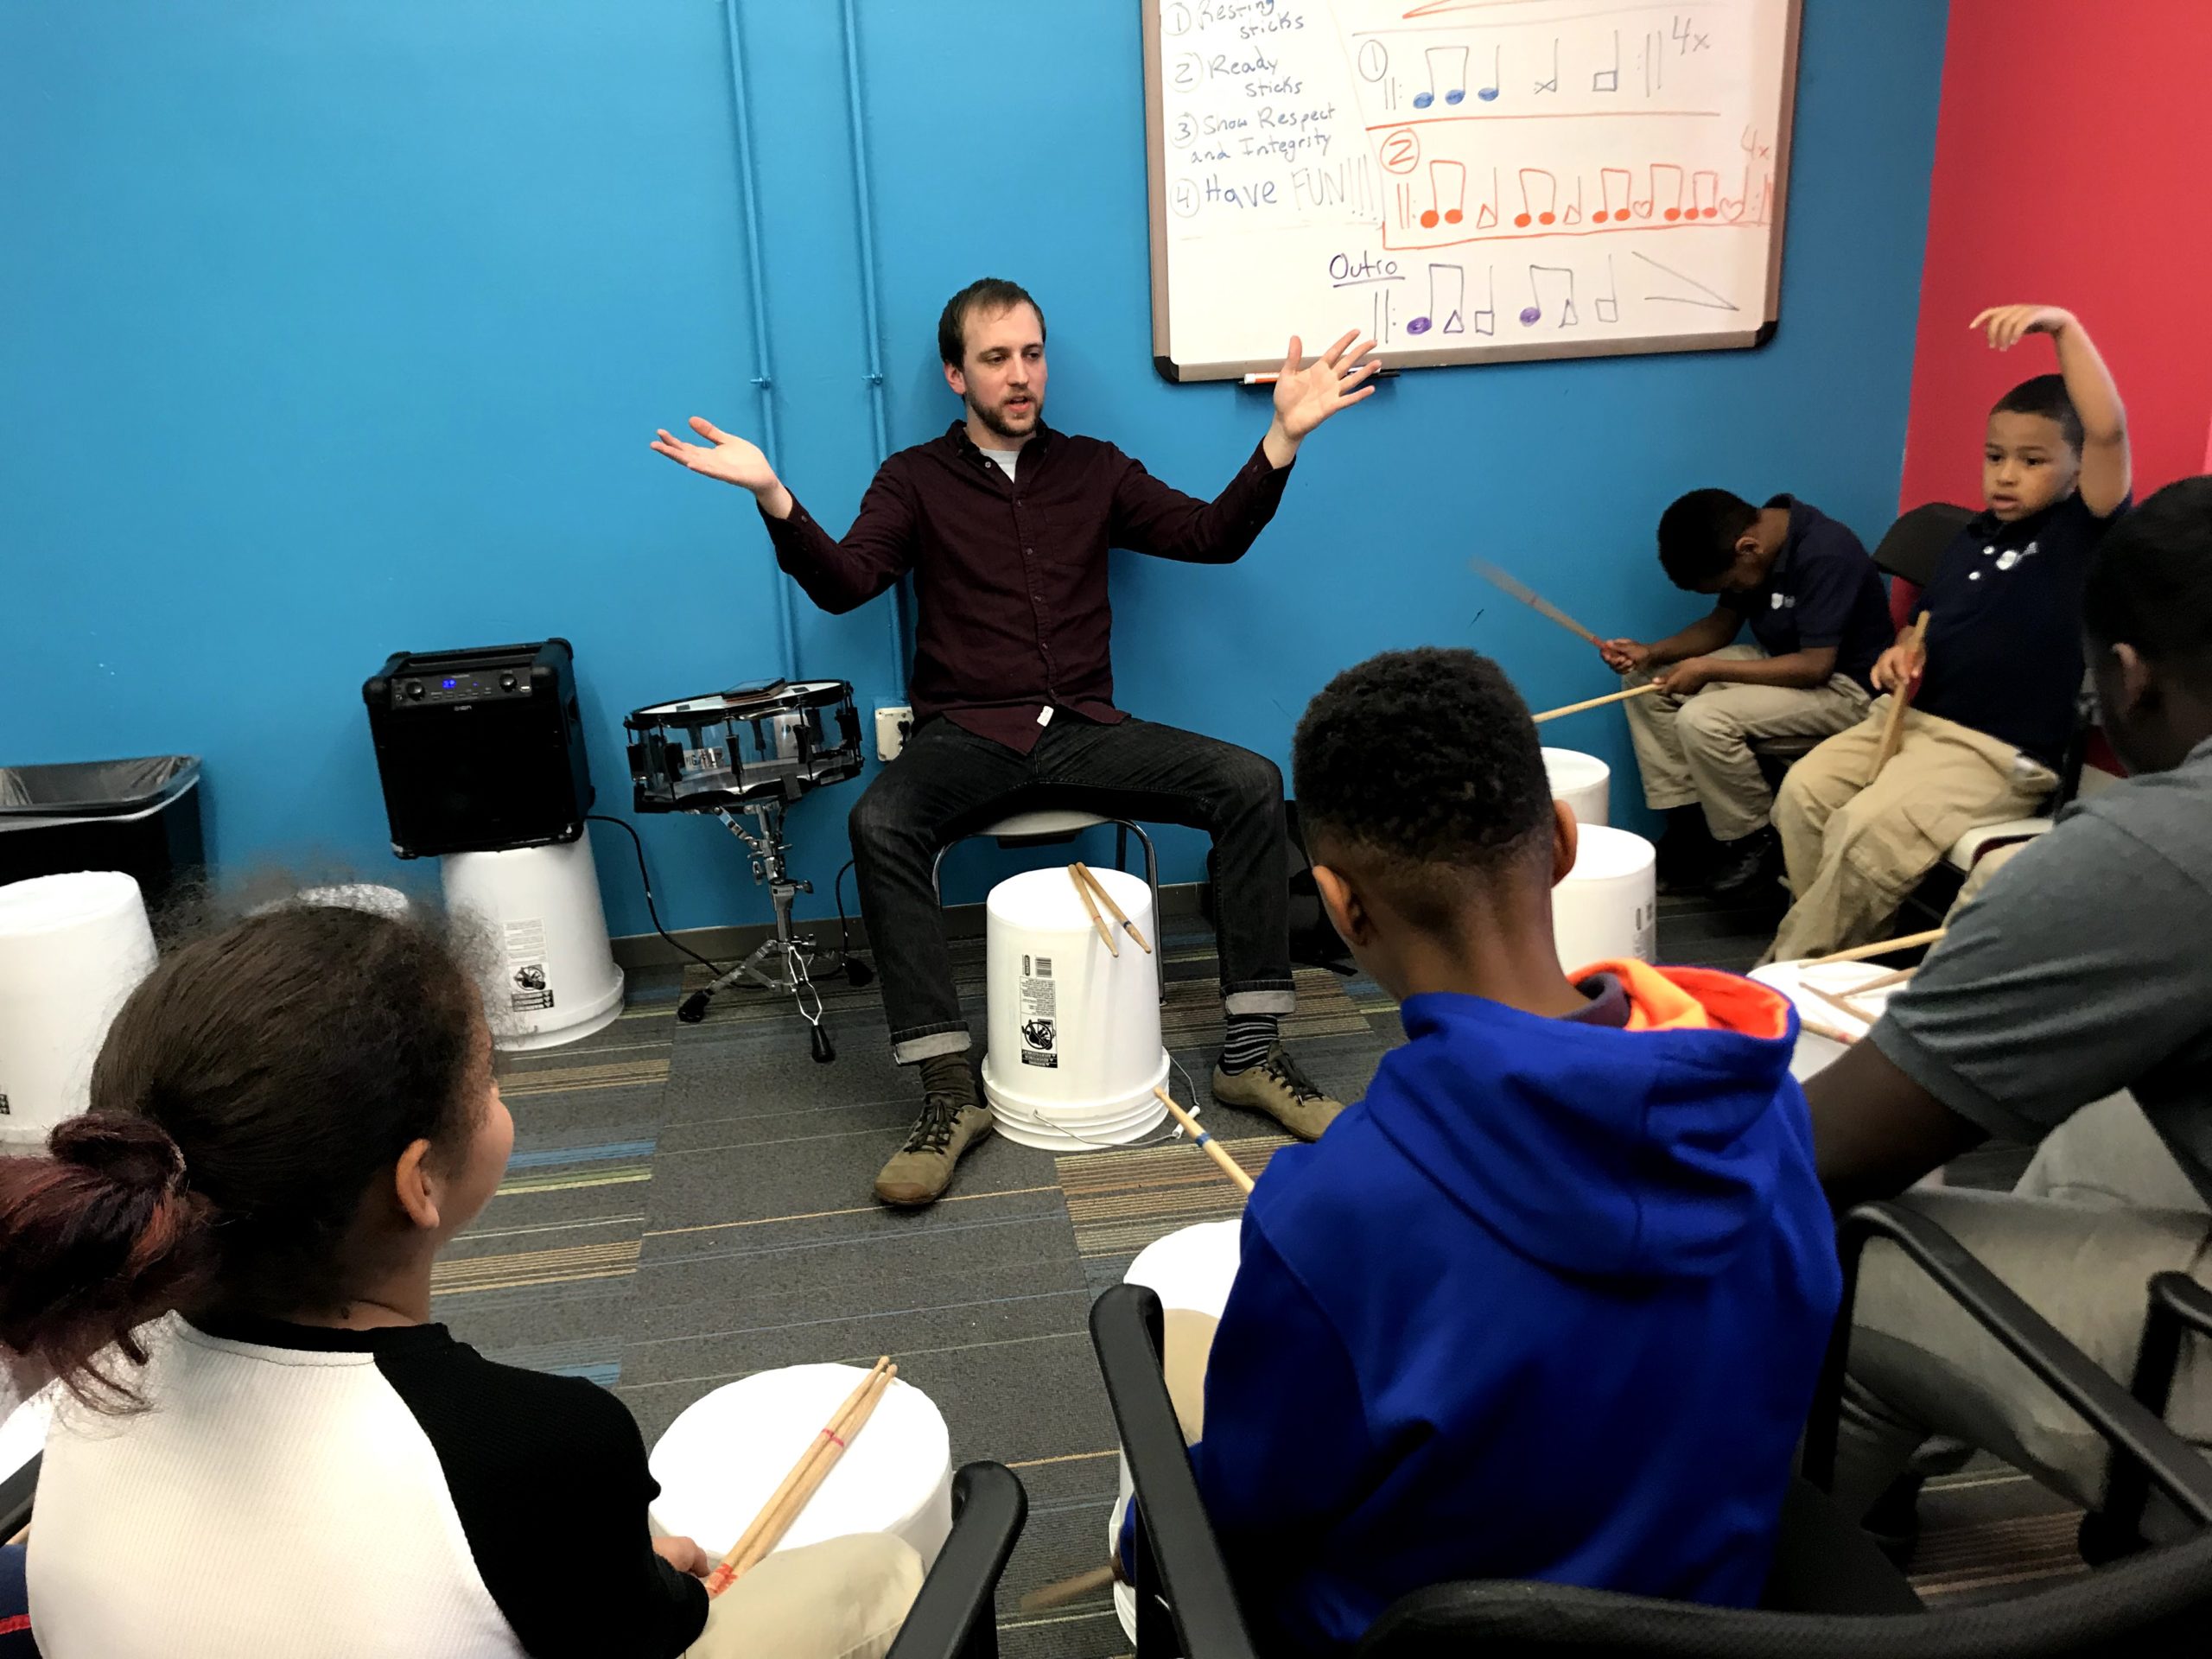 CMCB faculty member teaches bucket drumming to a group of students